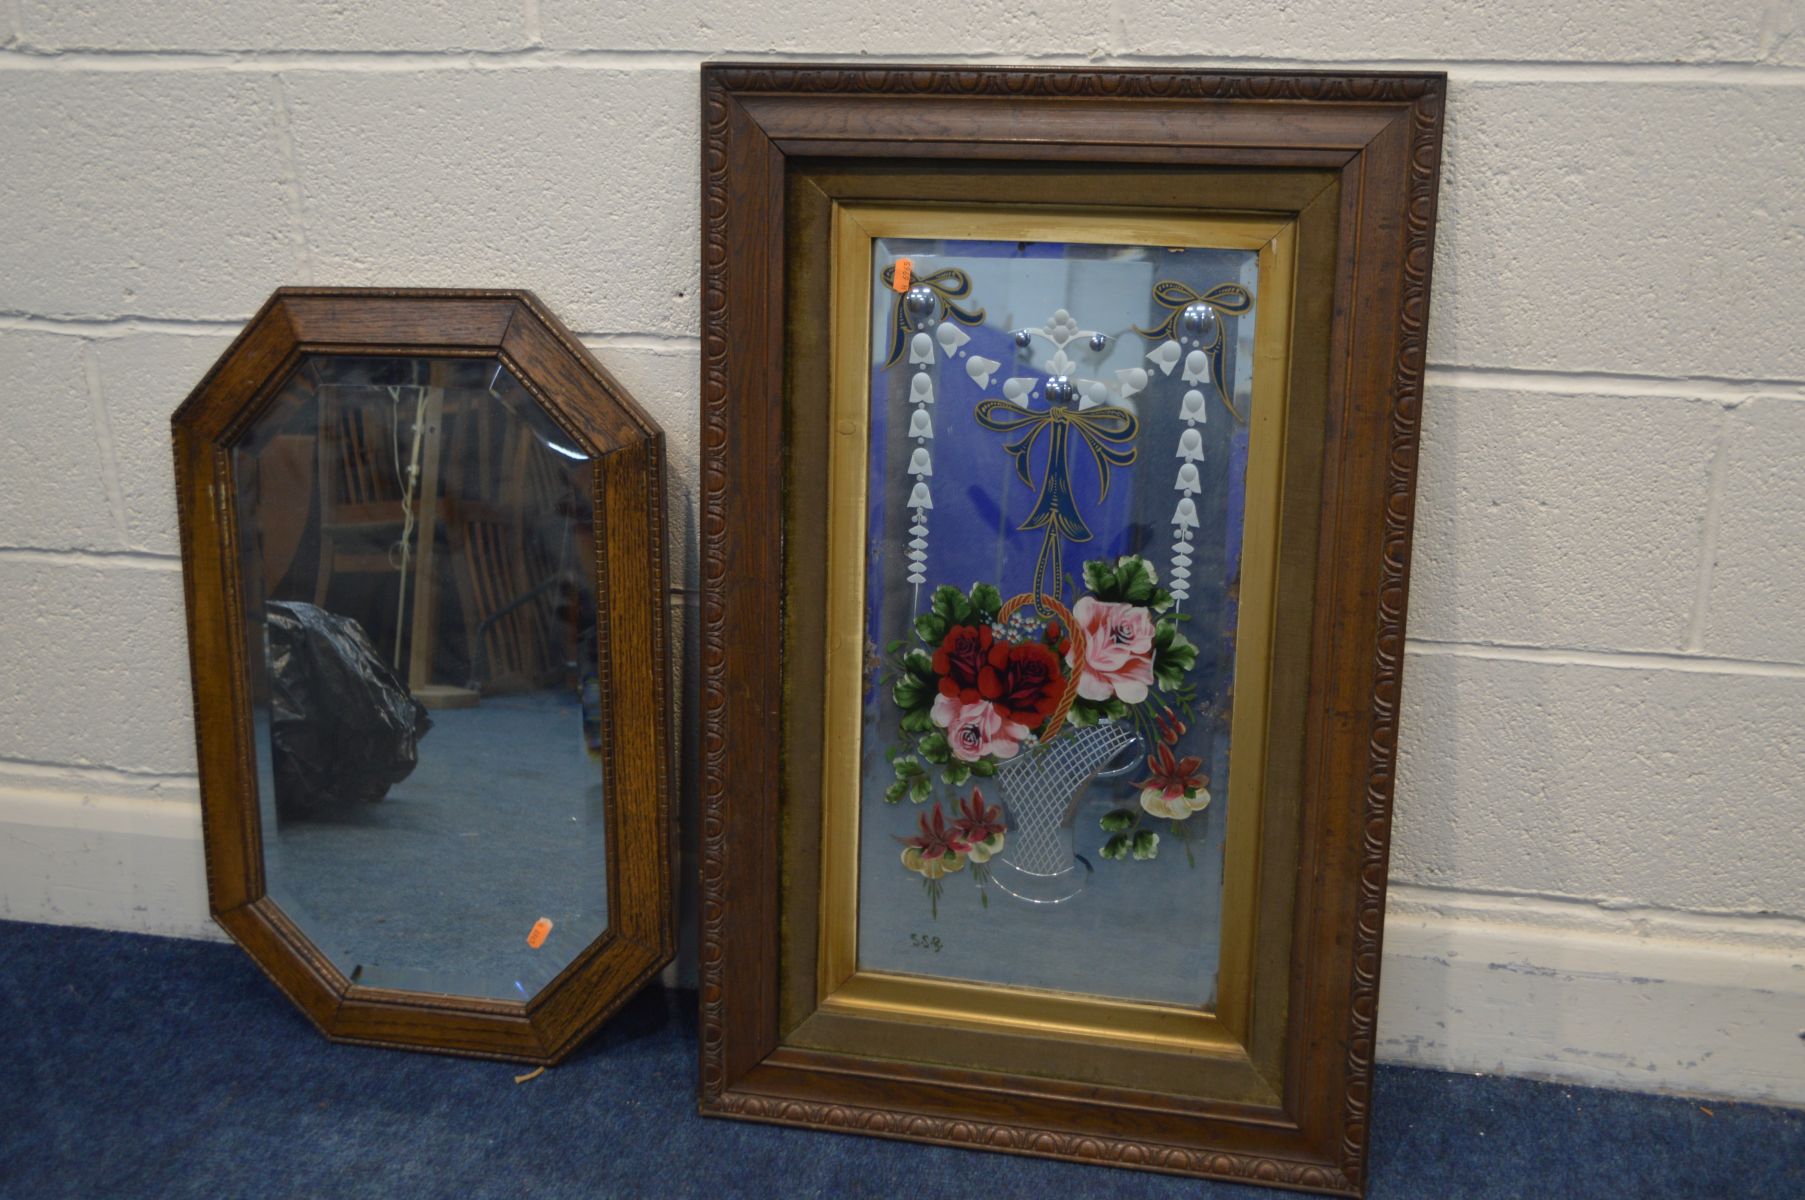 AN EARLY 20TH CENTURY OAK FRAMED GYPSIE MIRROR, 55cm x 86cm and another wall mirror with cantered